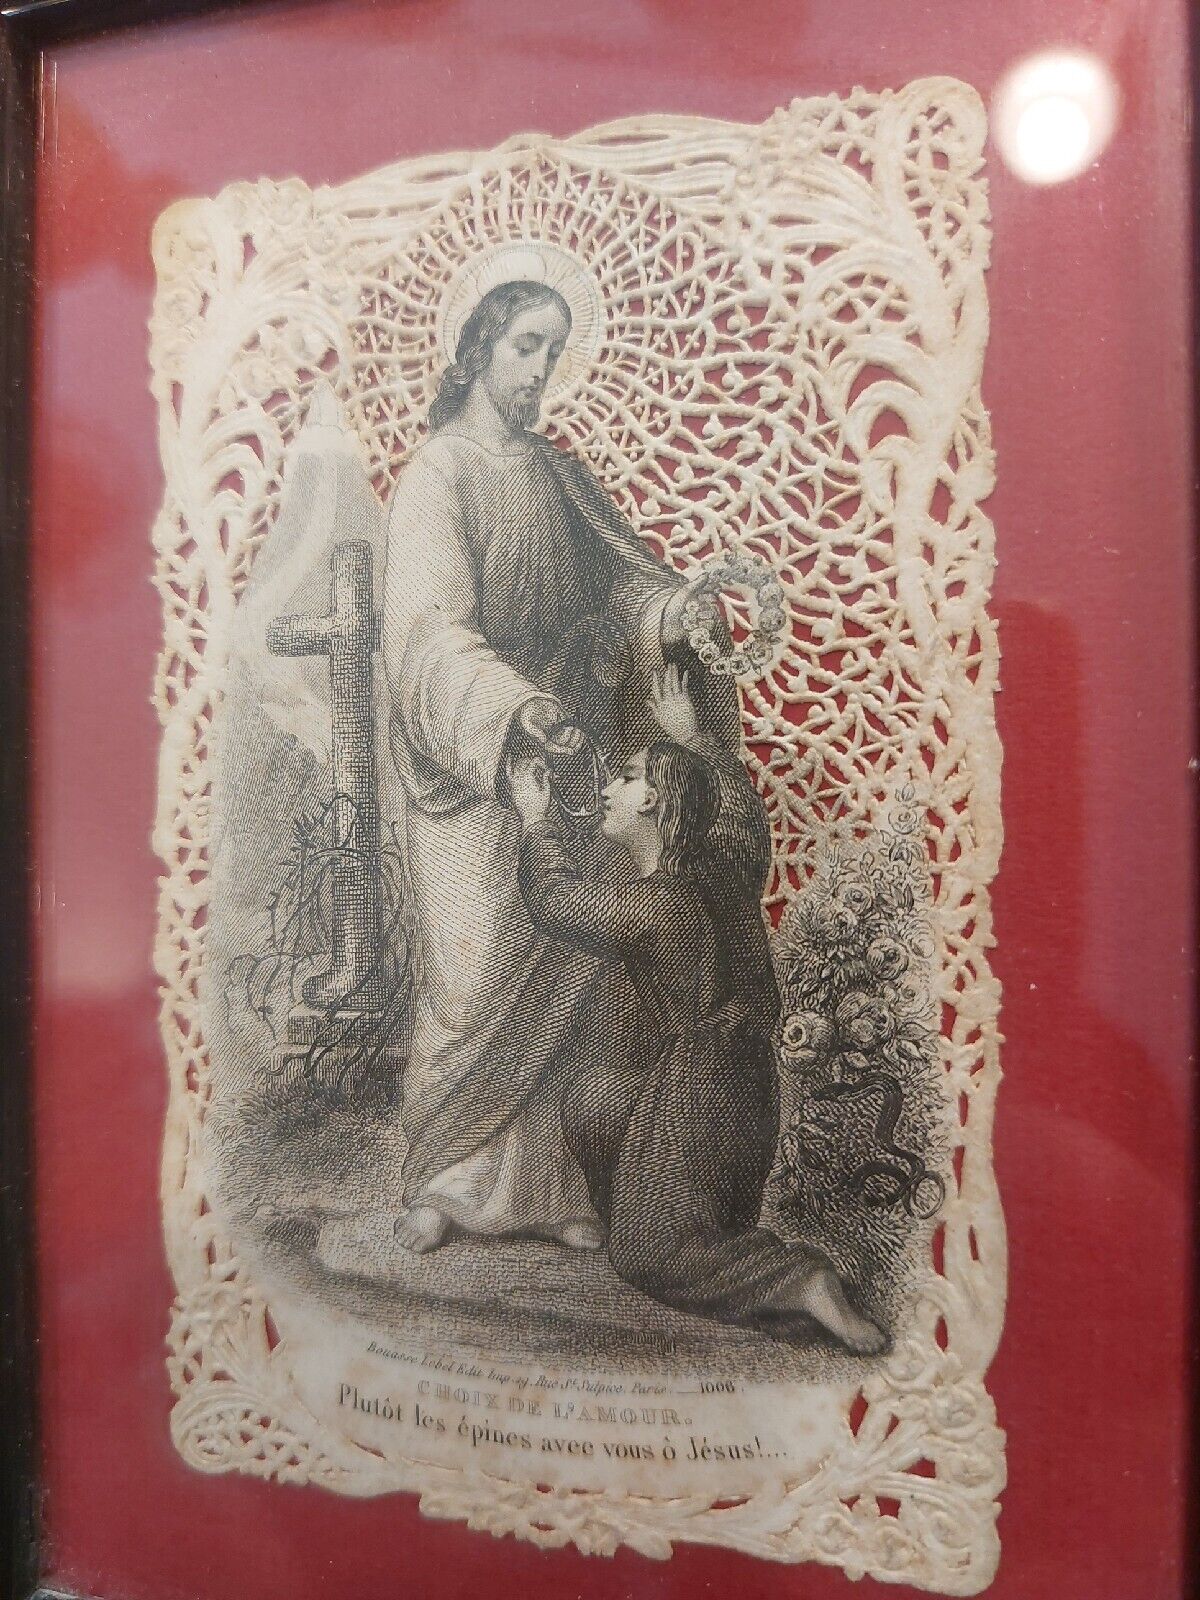 Canivet Image Pious Holy Card Choice of Love Blyth Lebel Publisher Paris